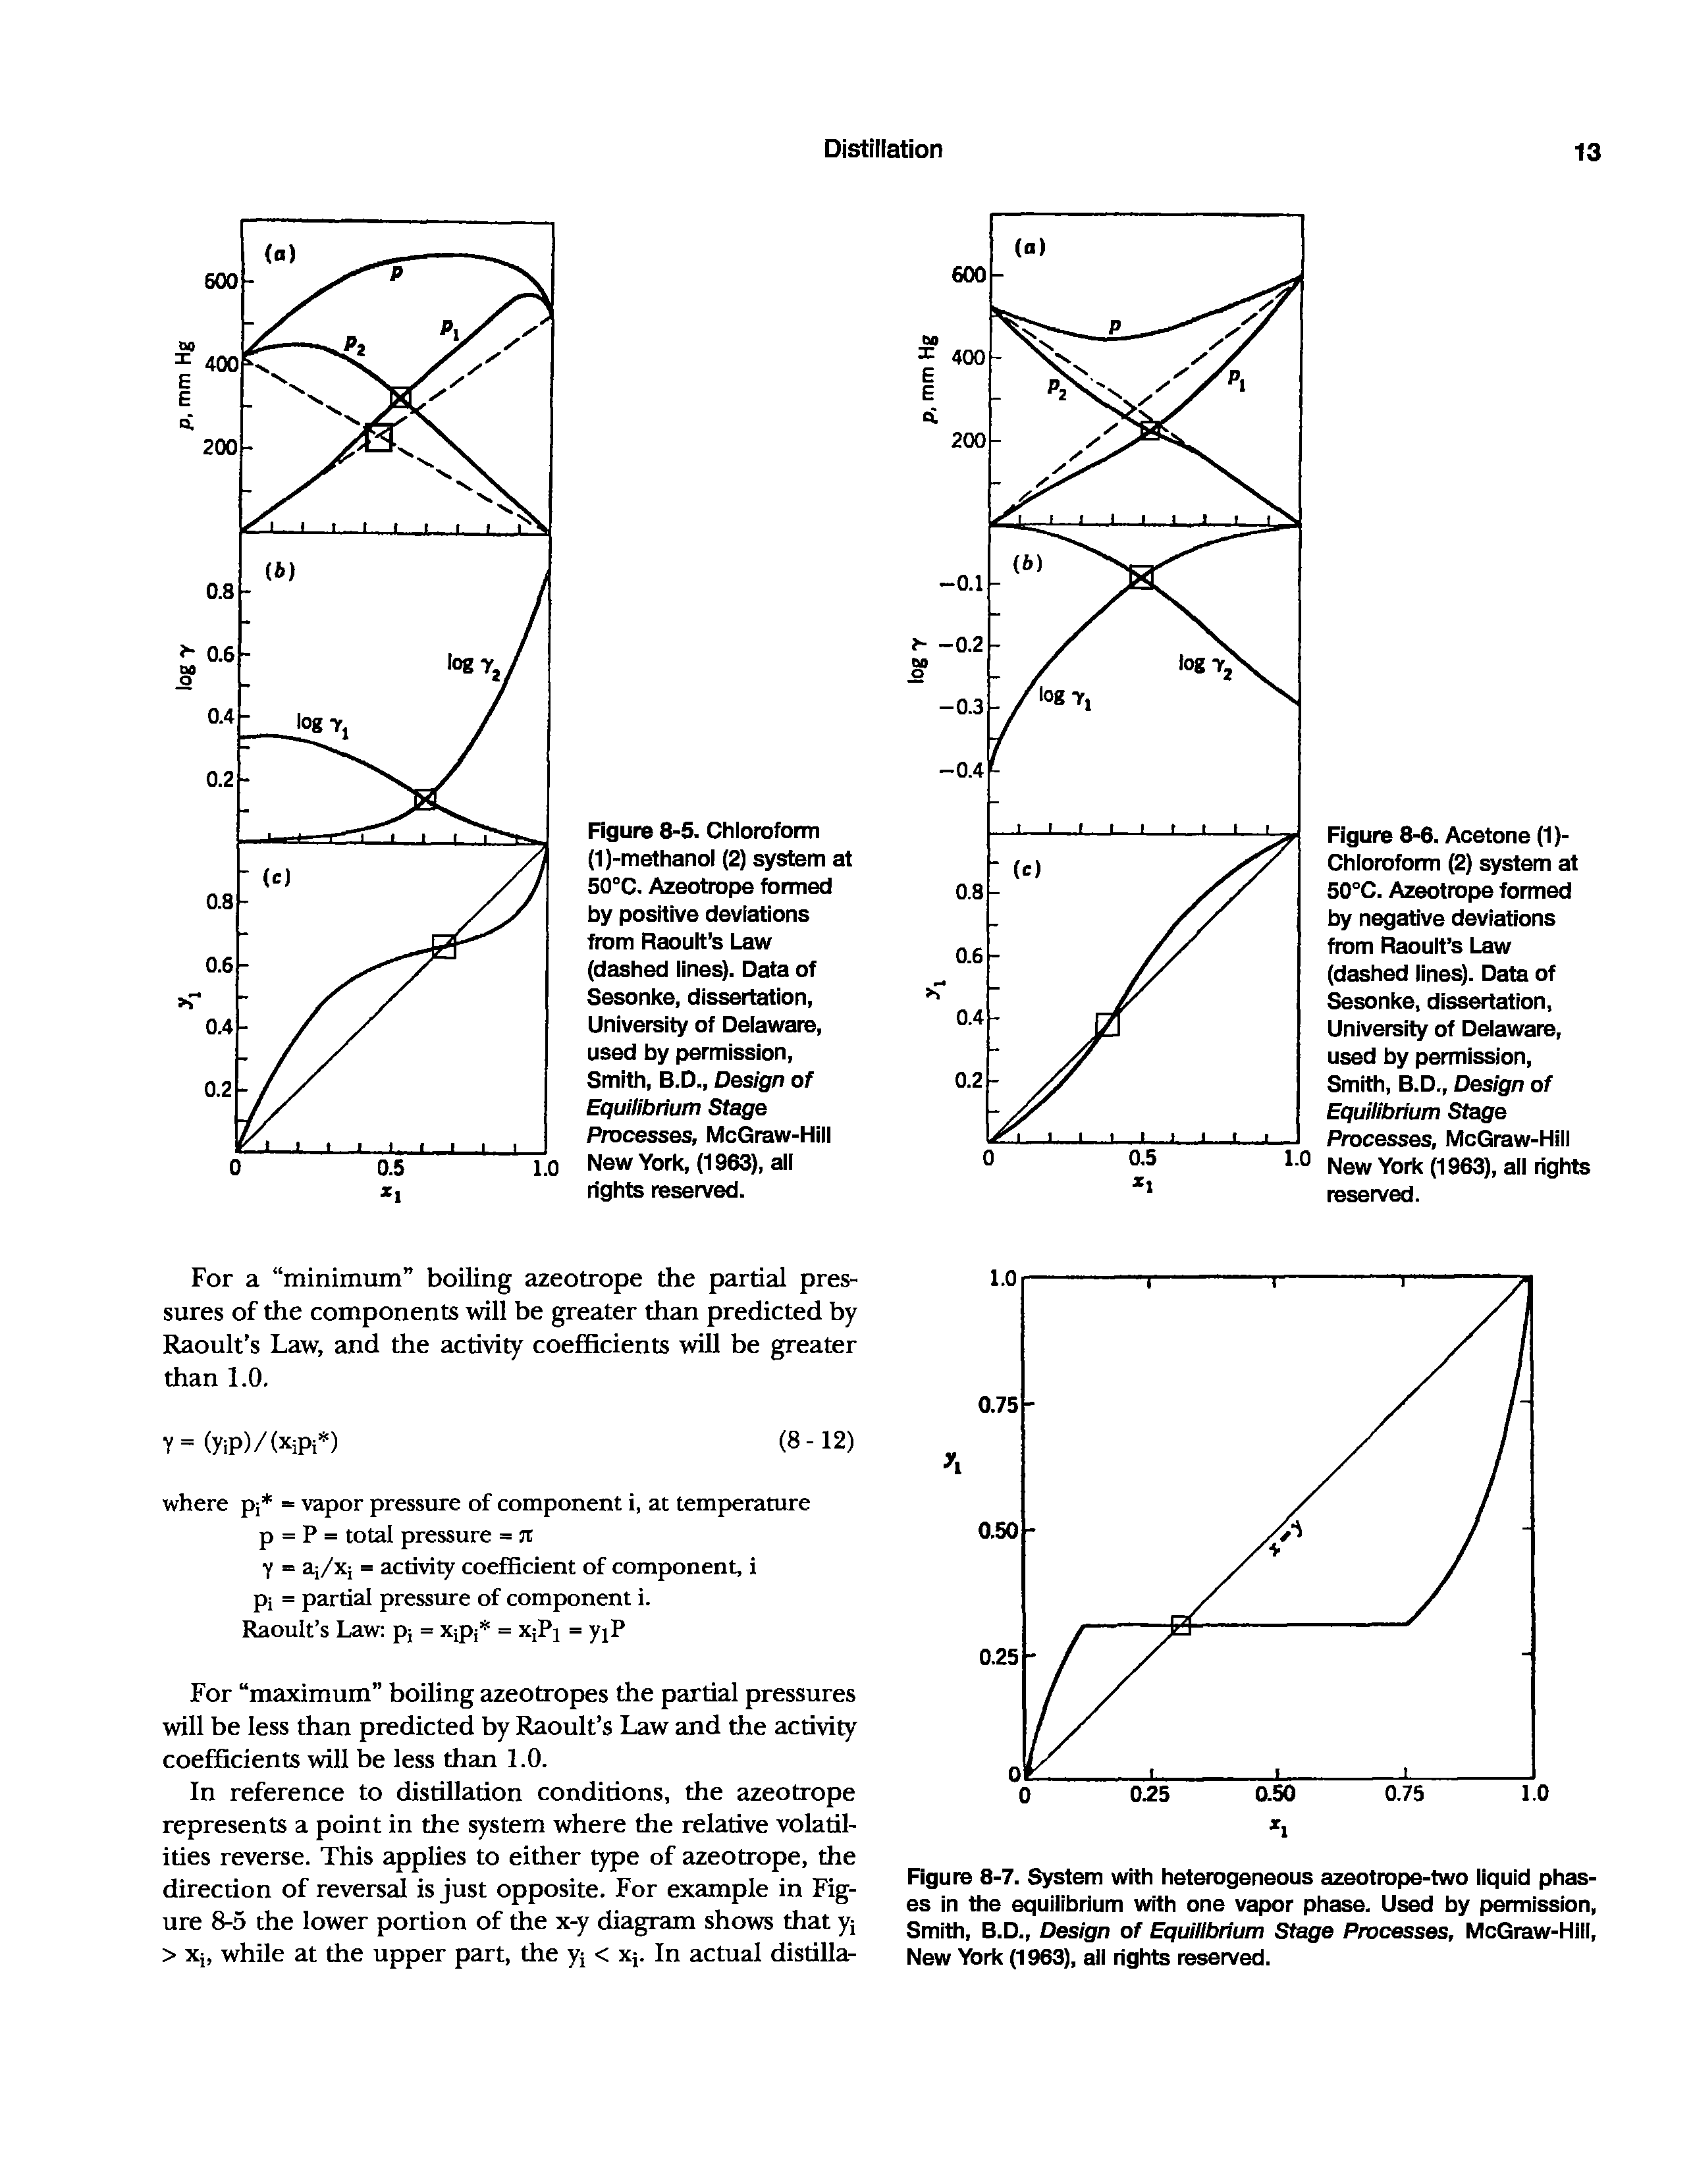 Figure 8-5. Chloroform (l)-methanol (2) system at 50°C. Azeotrope formed by positive deviations from Raoult s Law (dashed lines). Data of Sesonke, dissertation, University of Delaware, used by permission. Smith, B.D., Design of Equilibrium Stage Processes, McGraw-Hill New York, (1963), all rights reserved.